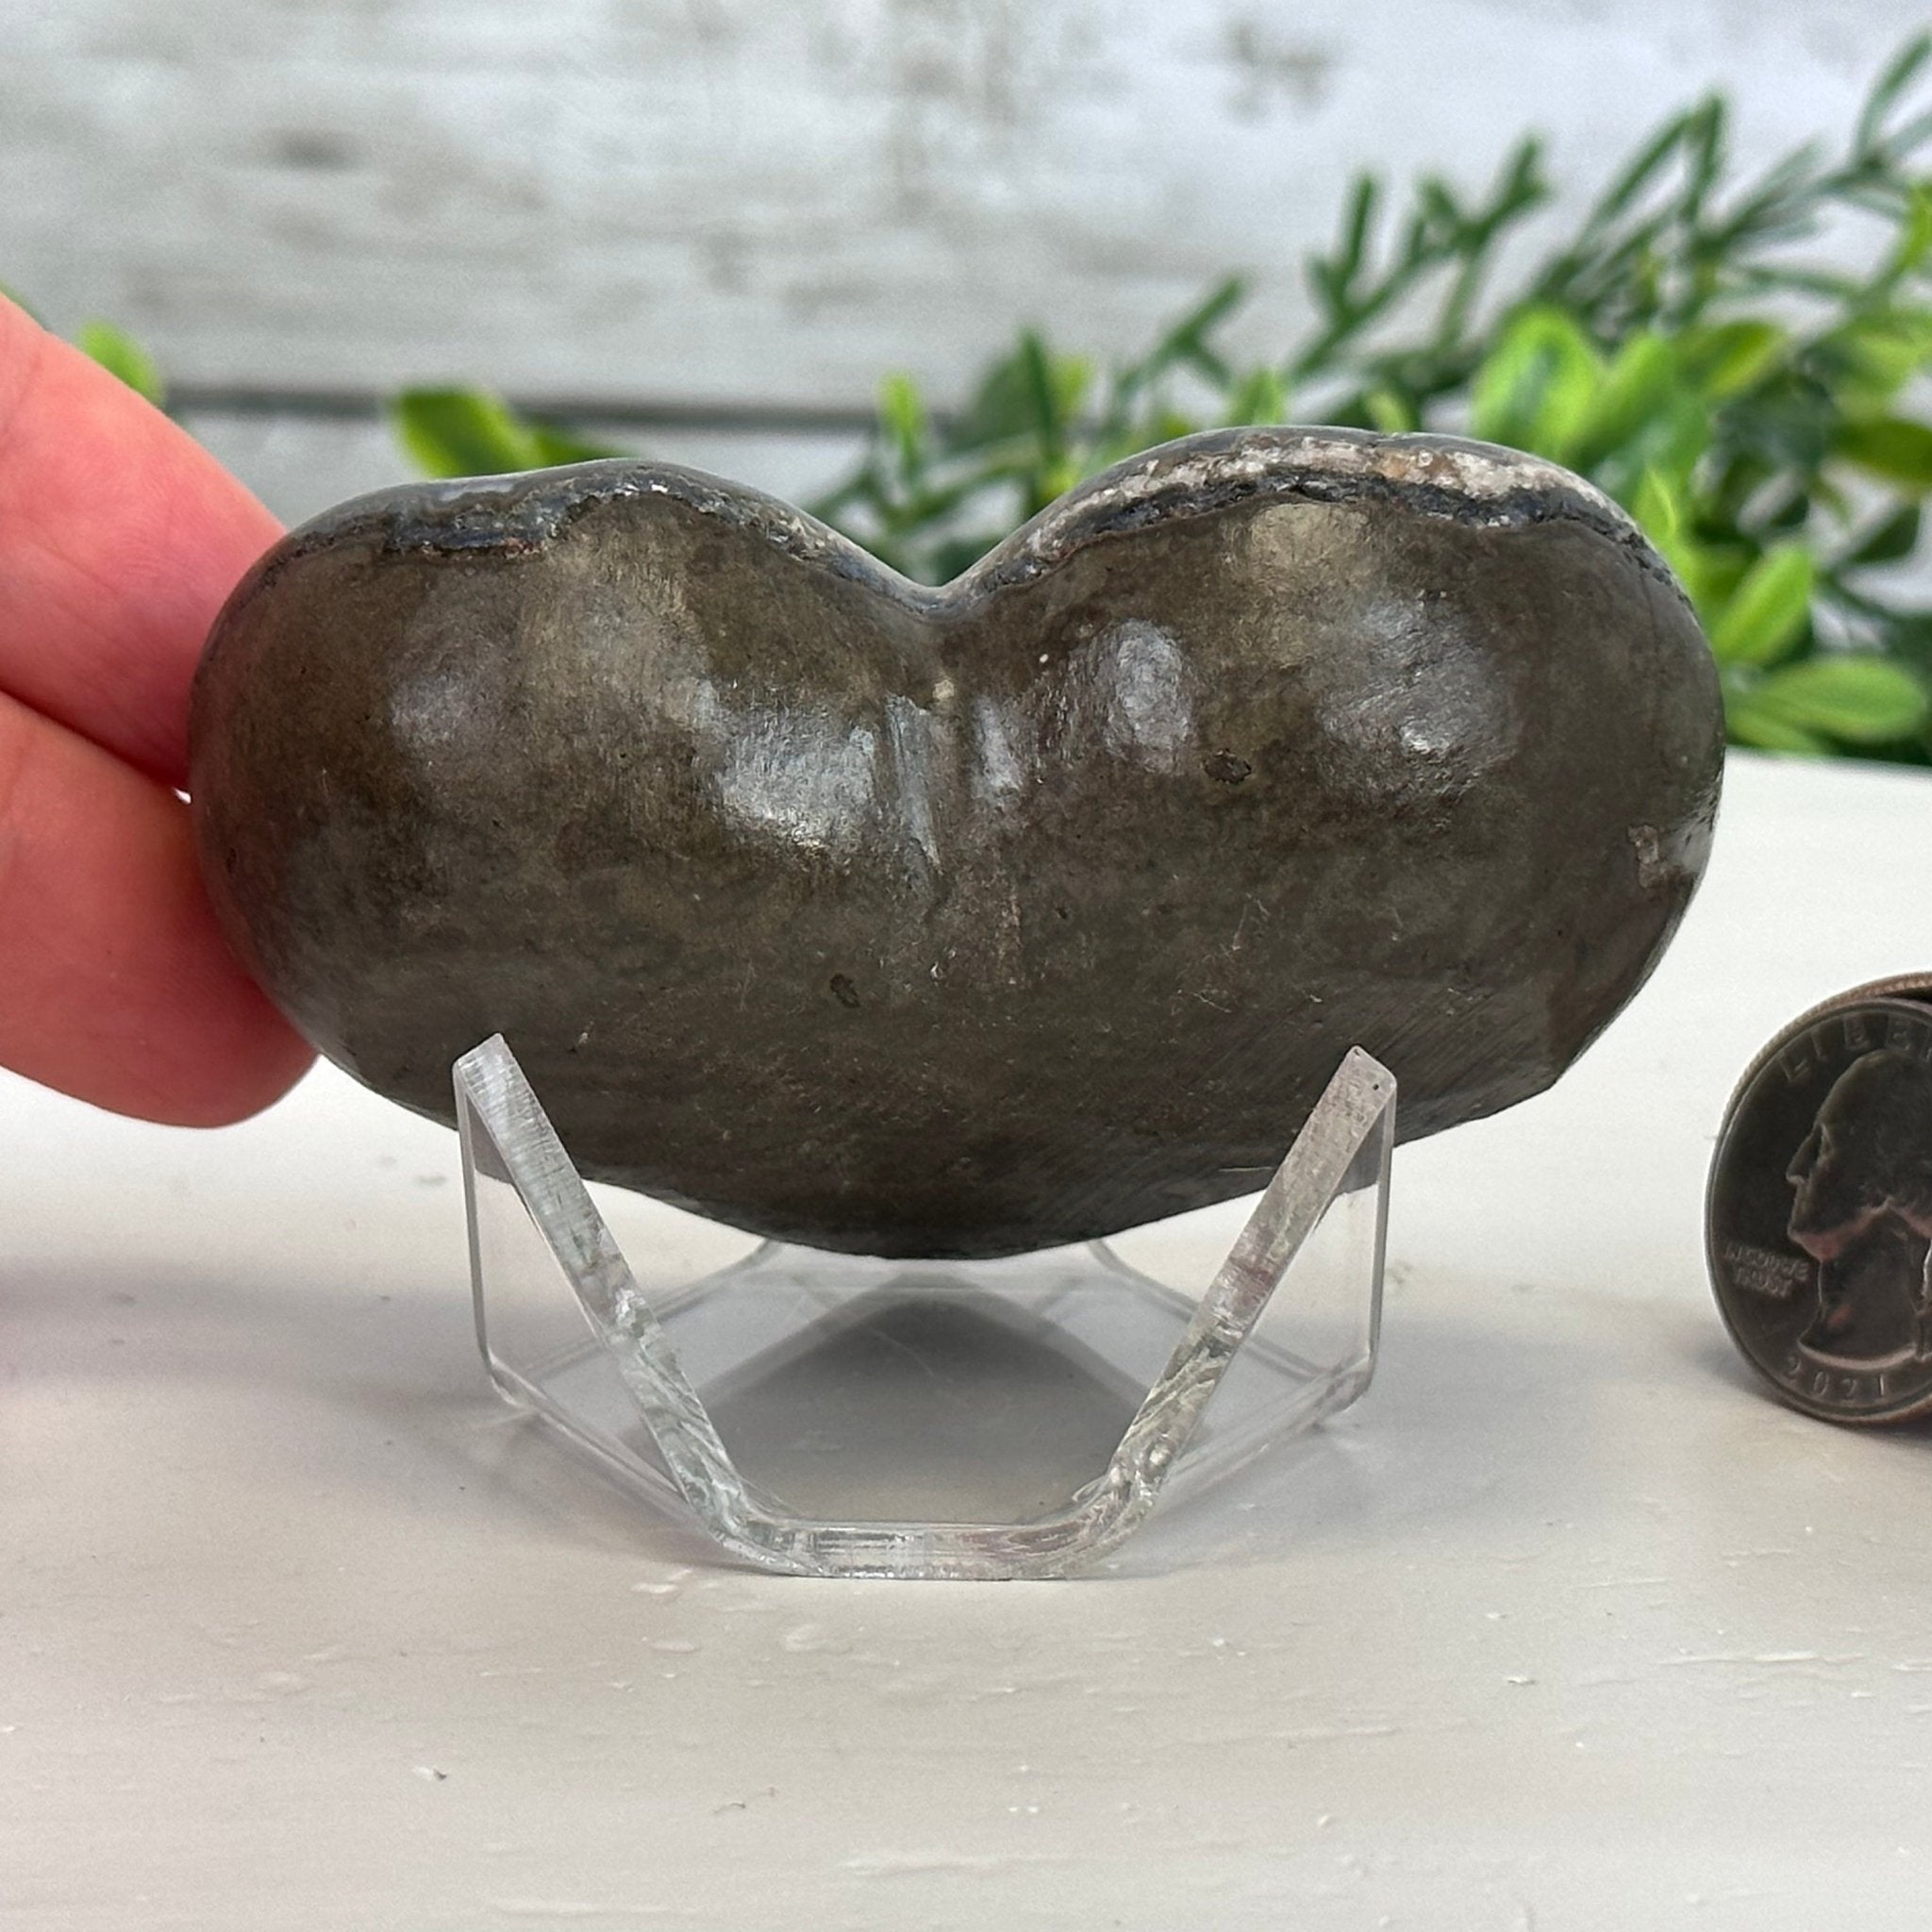 Extra Quality Amethyst Heart Geode on an Acrylic Stand, 0.41 lbs & 2.4" Tall #5462-0035 by Brazil Gems - Brazil GemsBrazil GemsExtra Quality Amethyst Heart Geode on an Acrylic Stand, 0.41 lbs & 2.4" Tall #5462-0035 by Brazil GemsHearts5462-0035